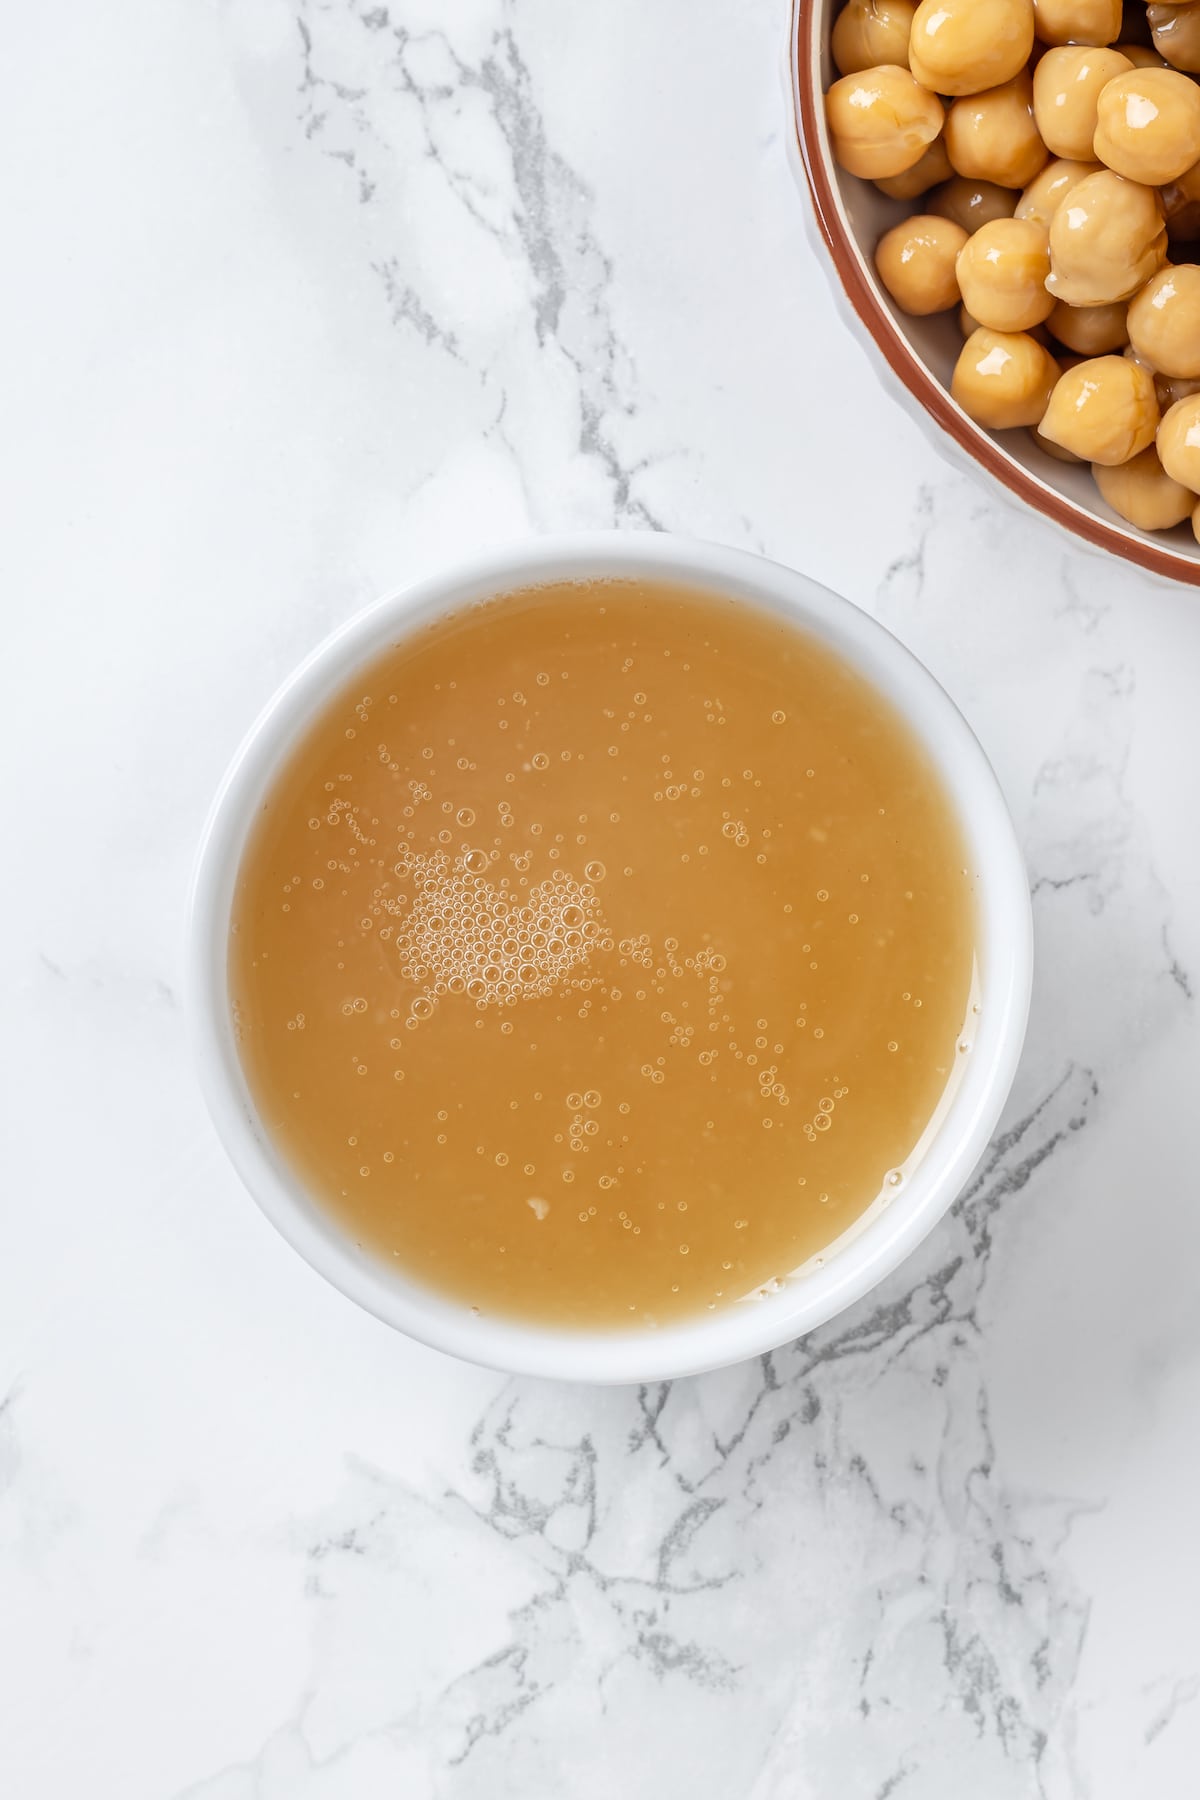 Overhead view of chickpea liquid in small white bowl